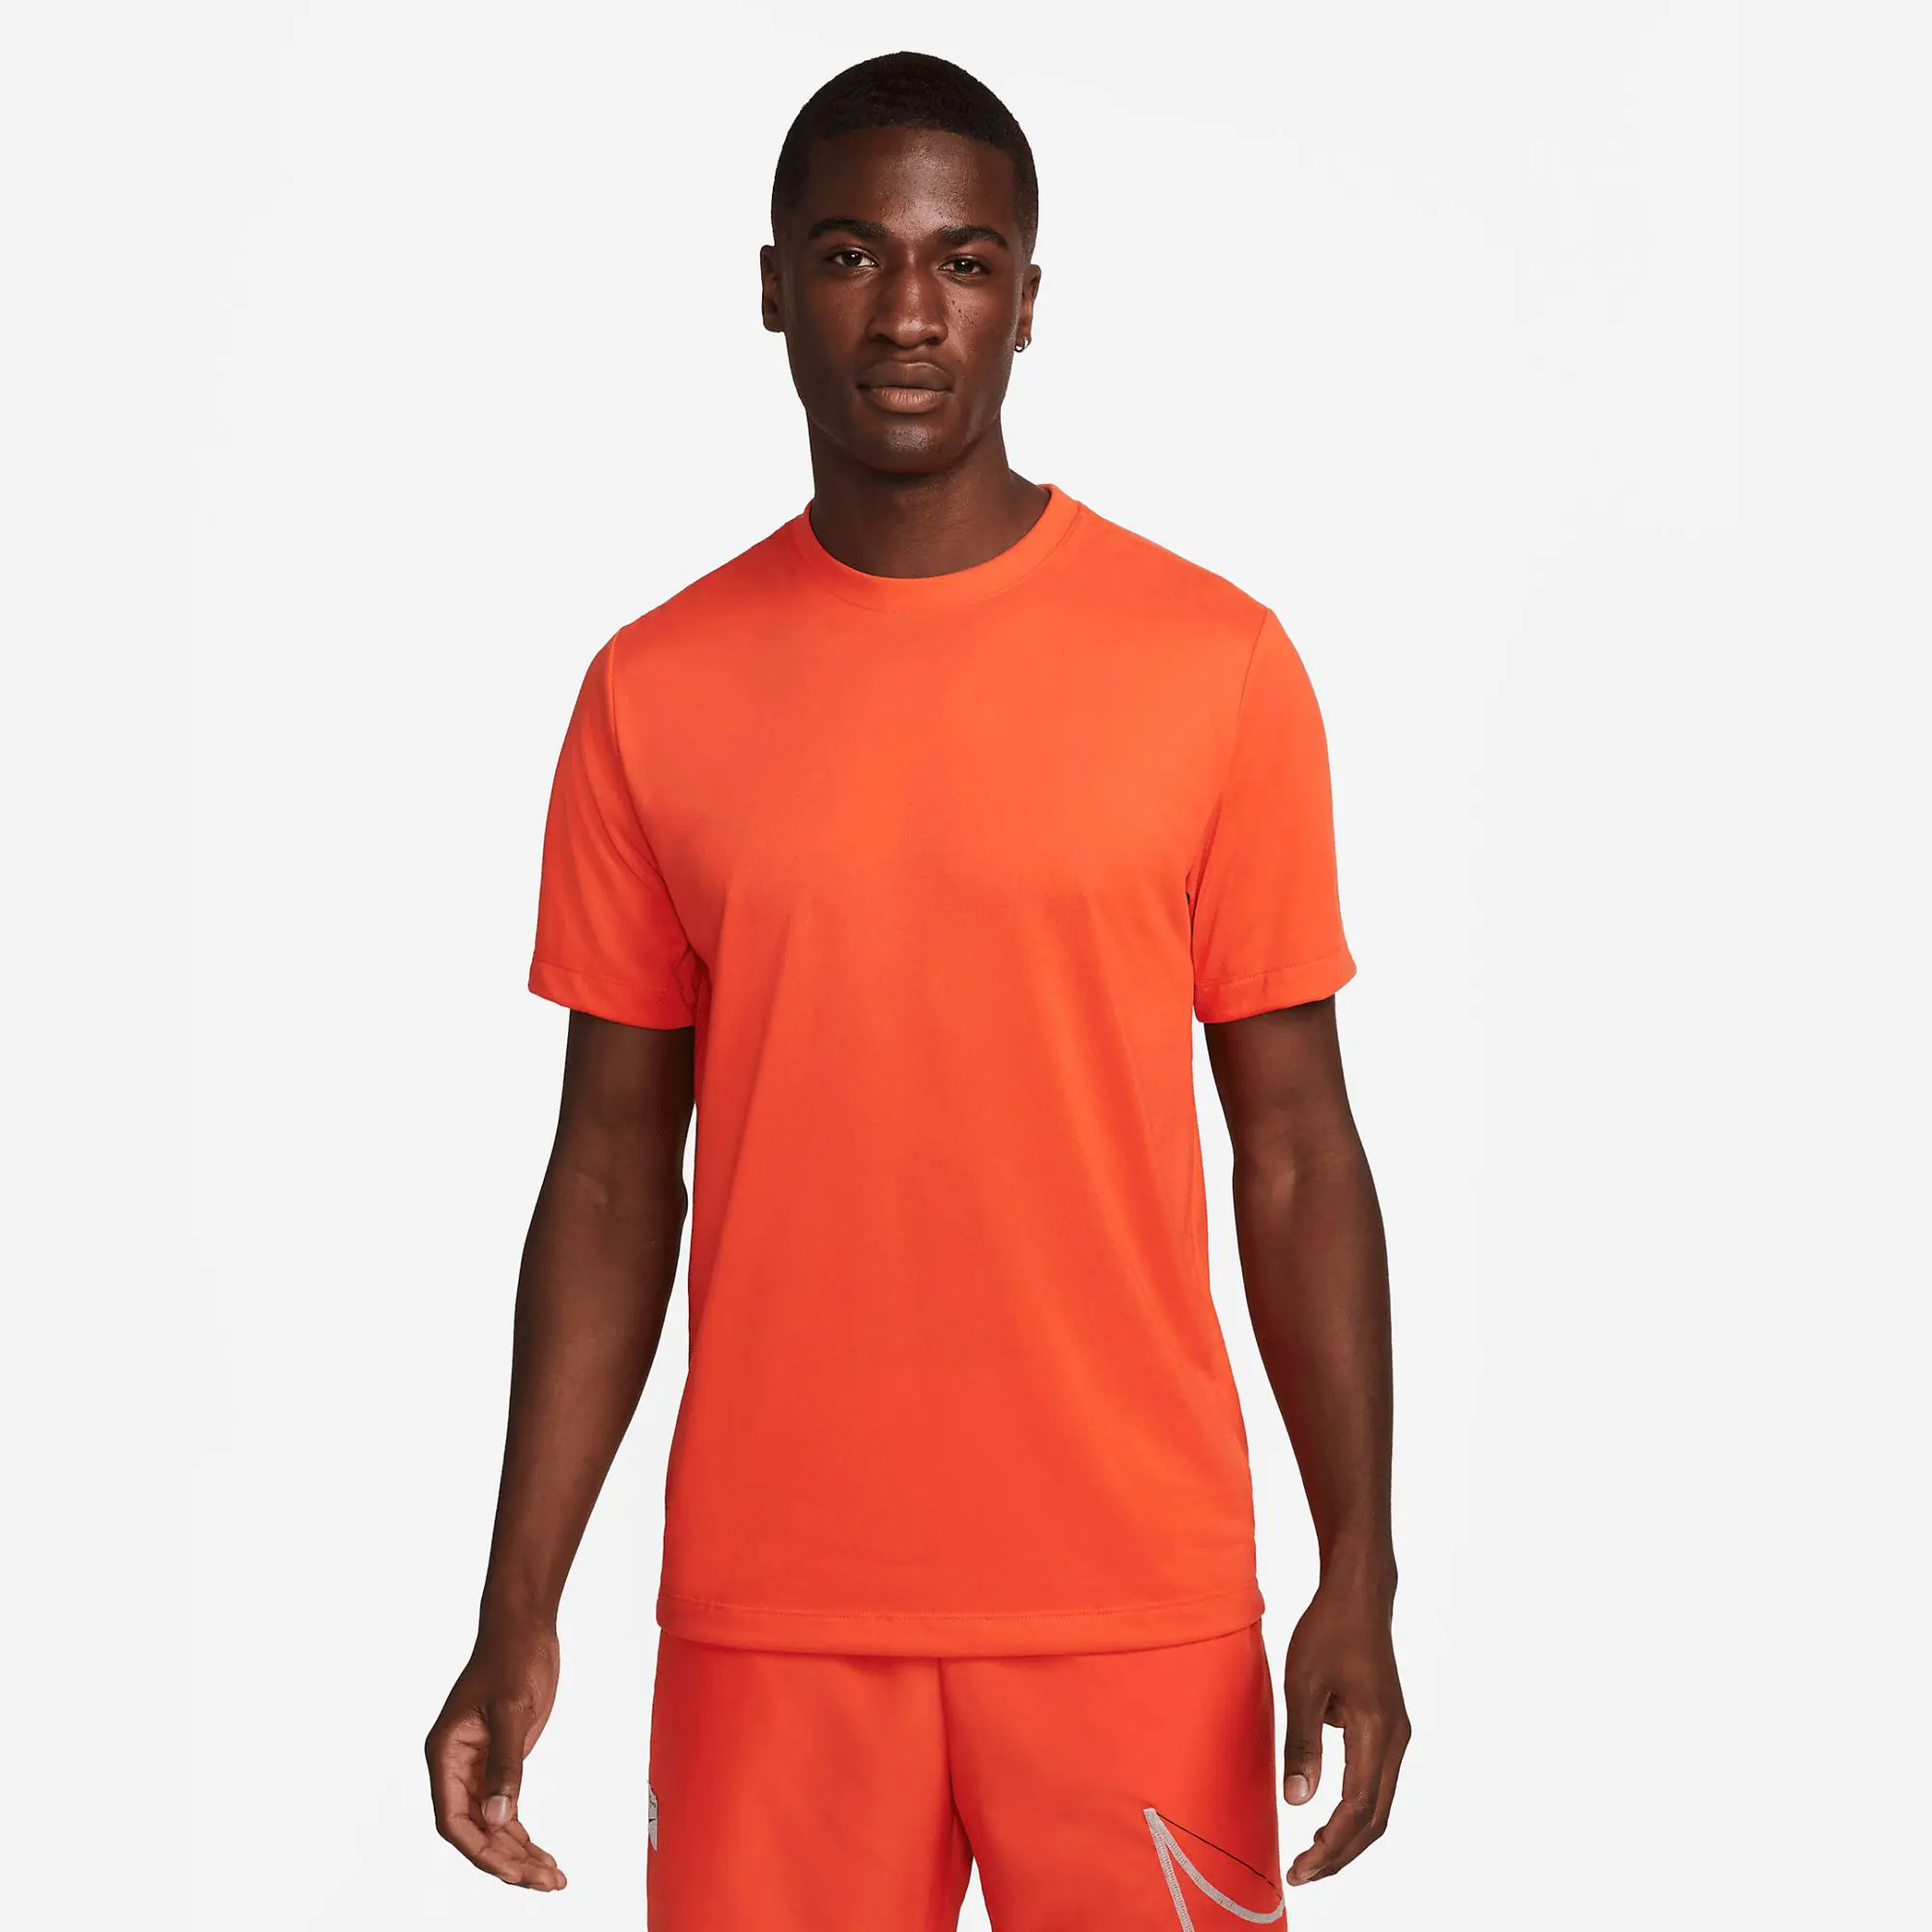 Men's Team Orange Fitness T-Shirt 100% Polyester Solid Color Relaxed Standard Fit Ribbed Neckband Soft Smooth Jersey Fabric